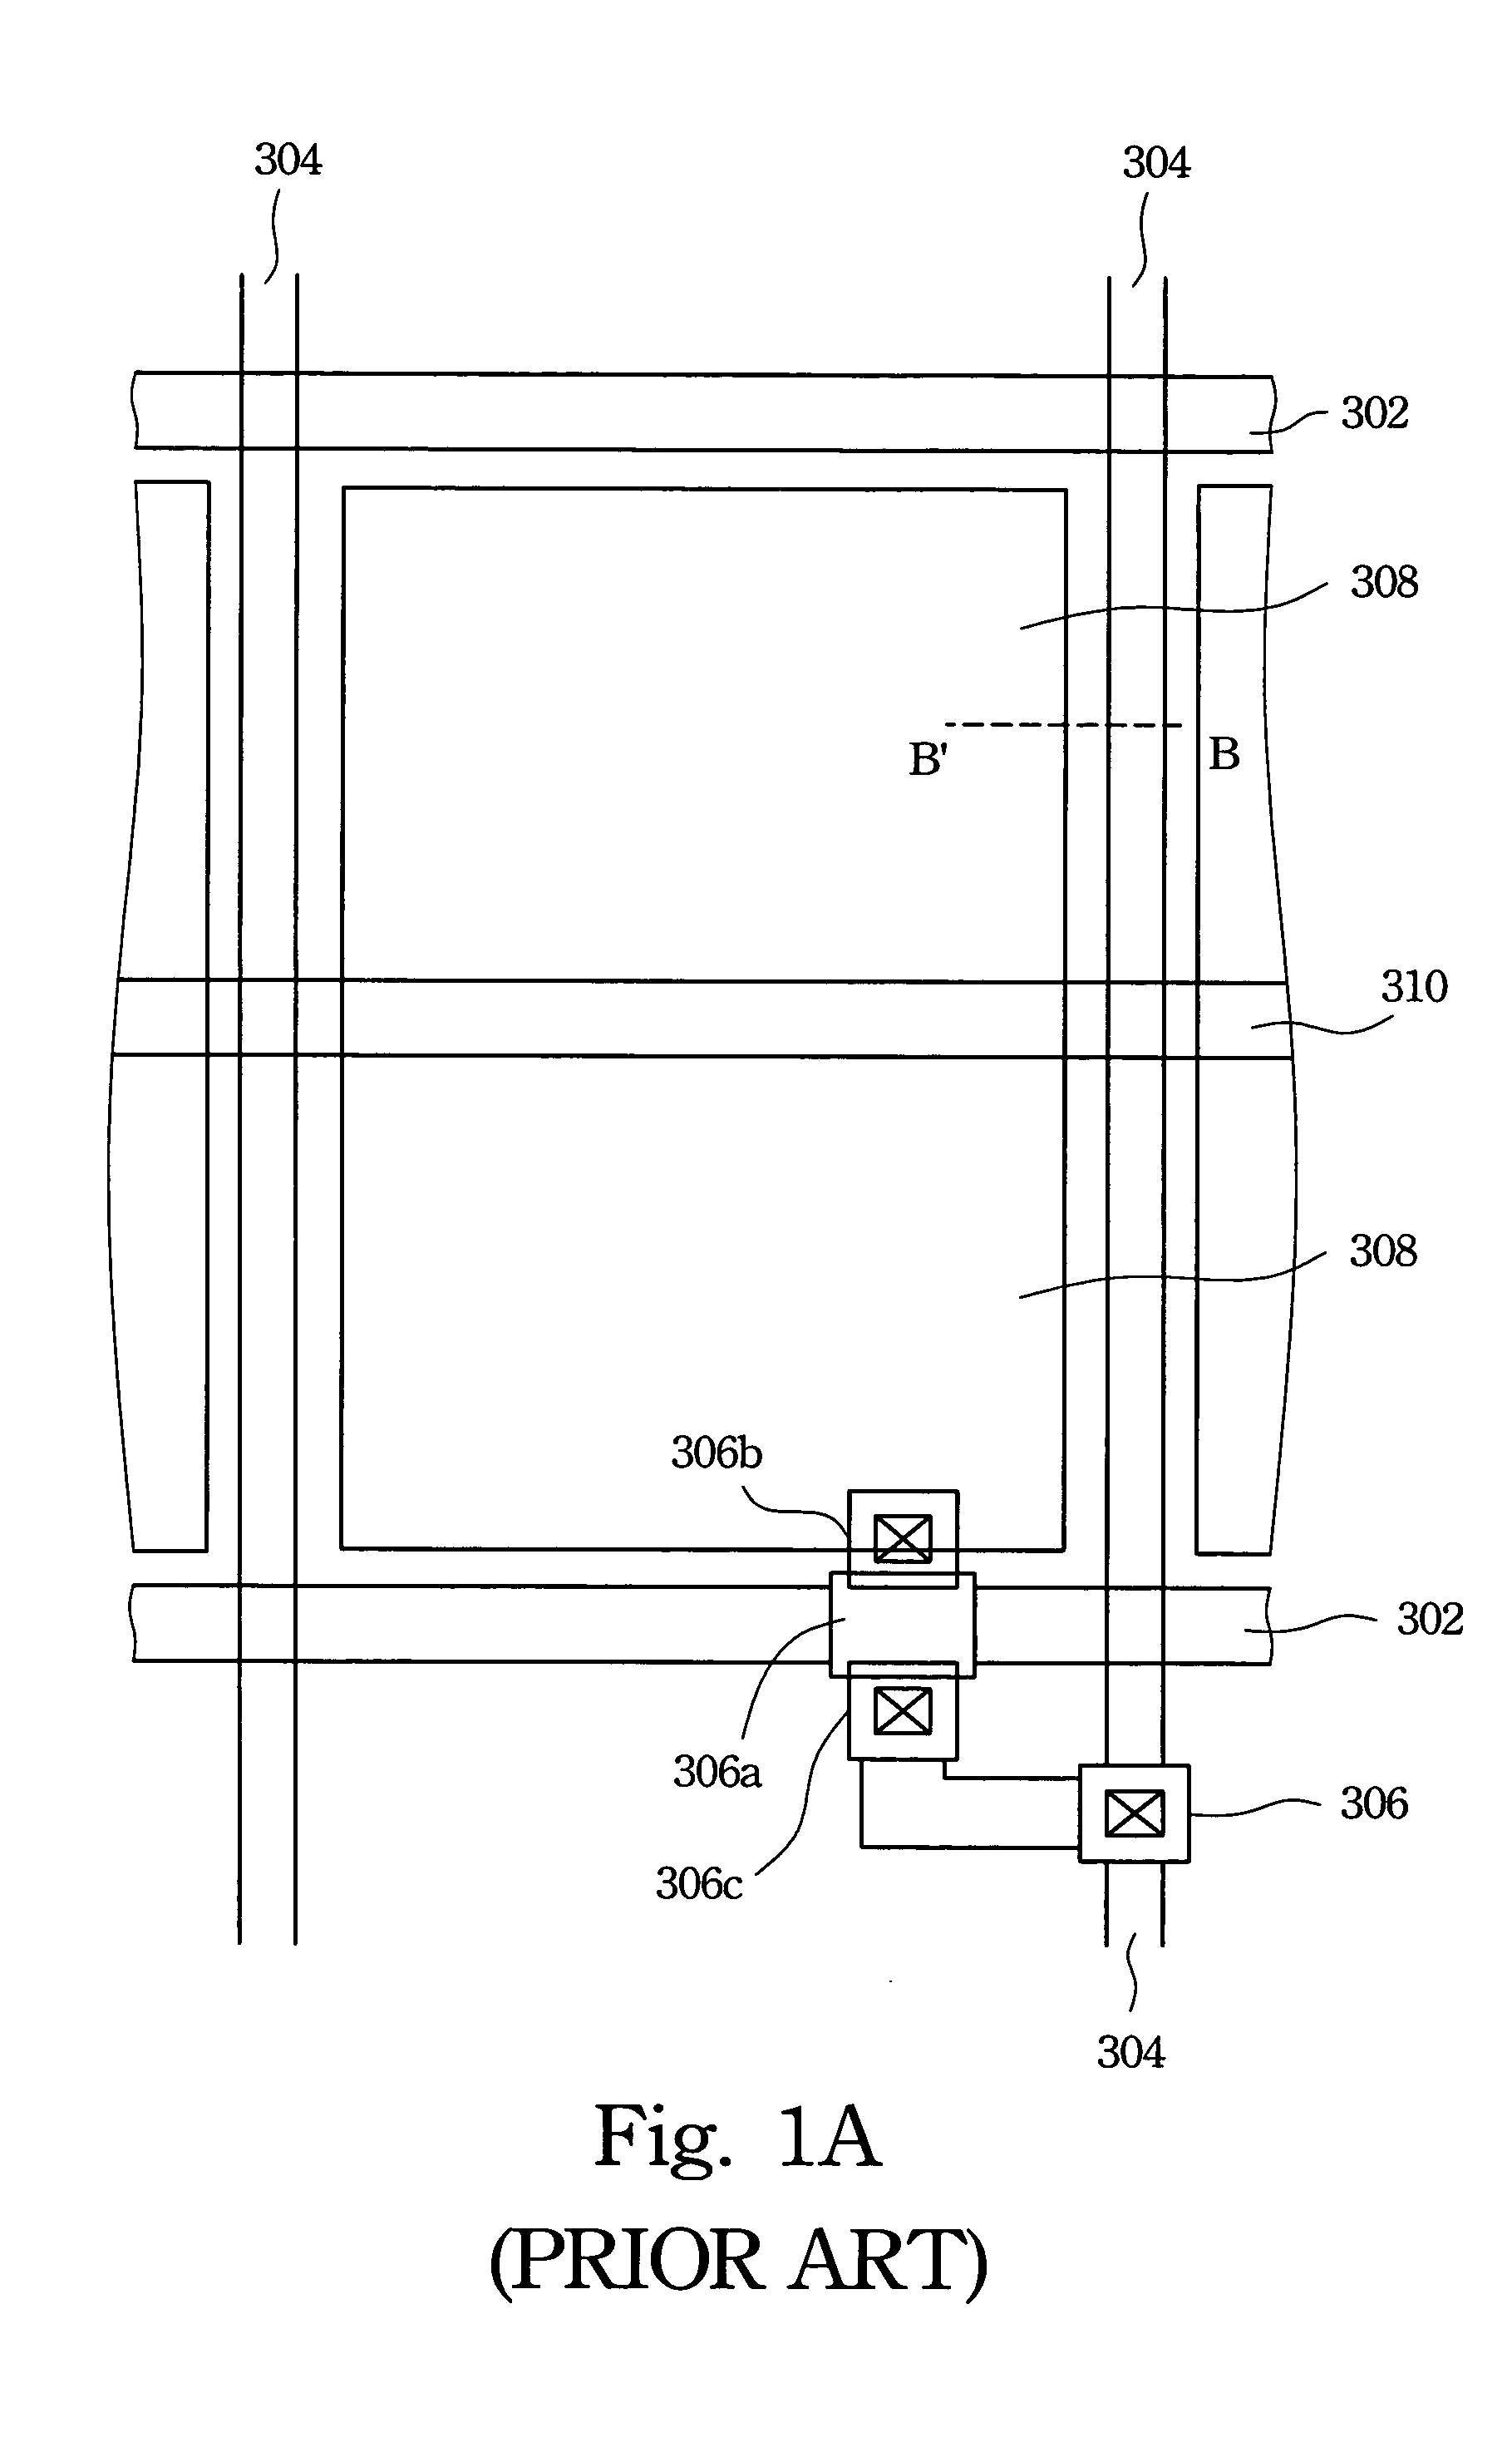 Pixel structure for liquid crystal display